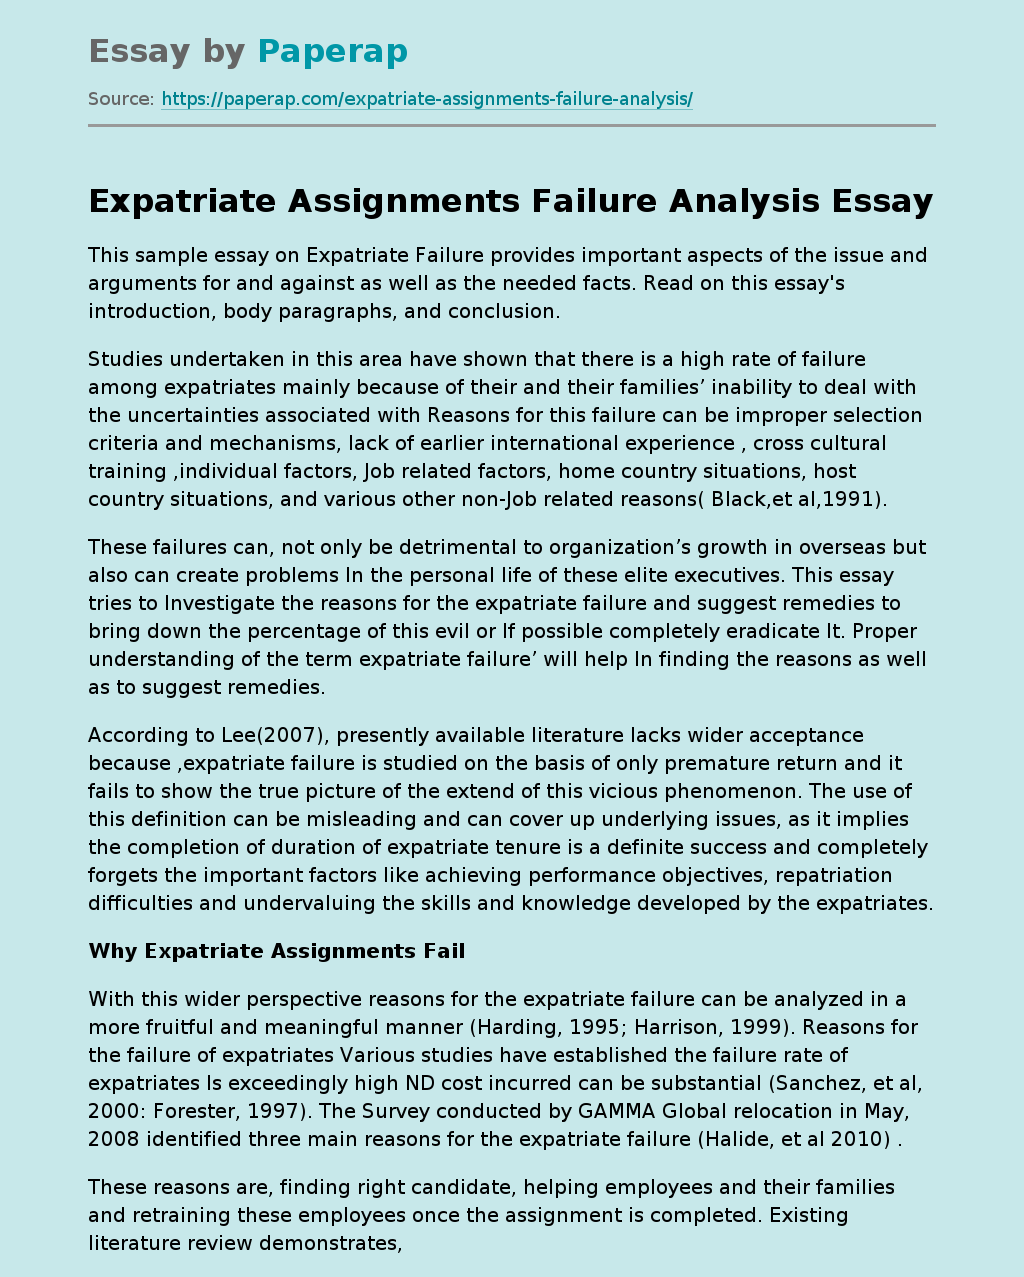 Expatriate Assignments Failure Analysis